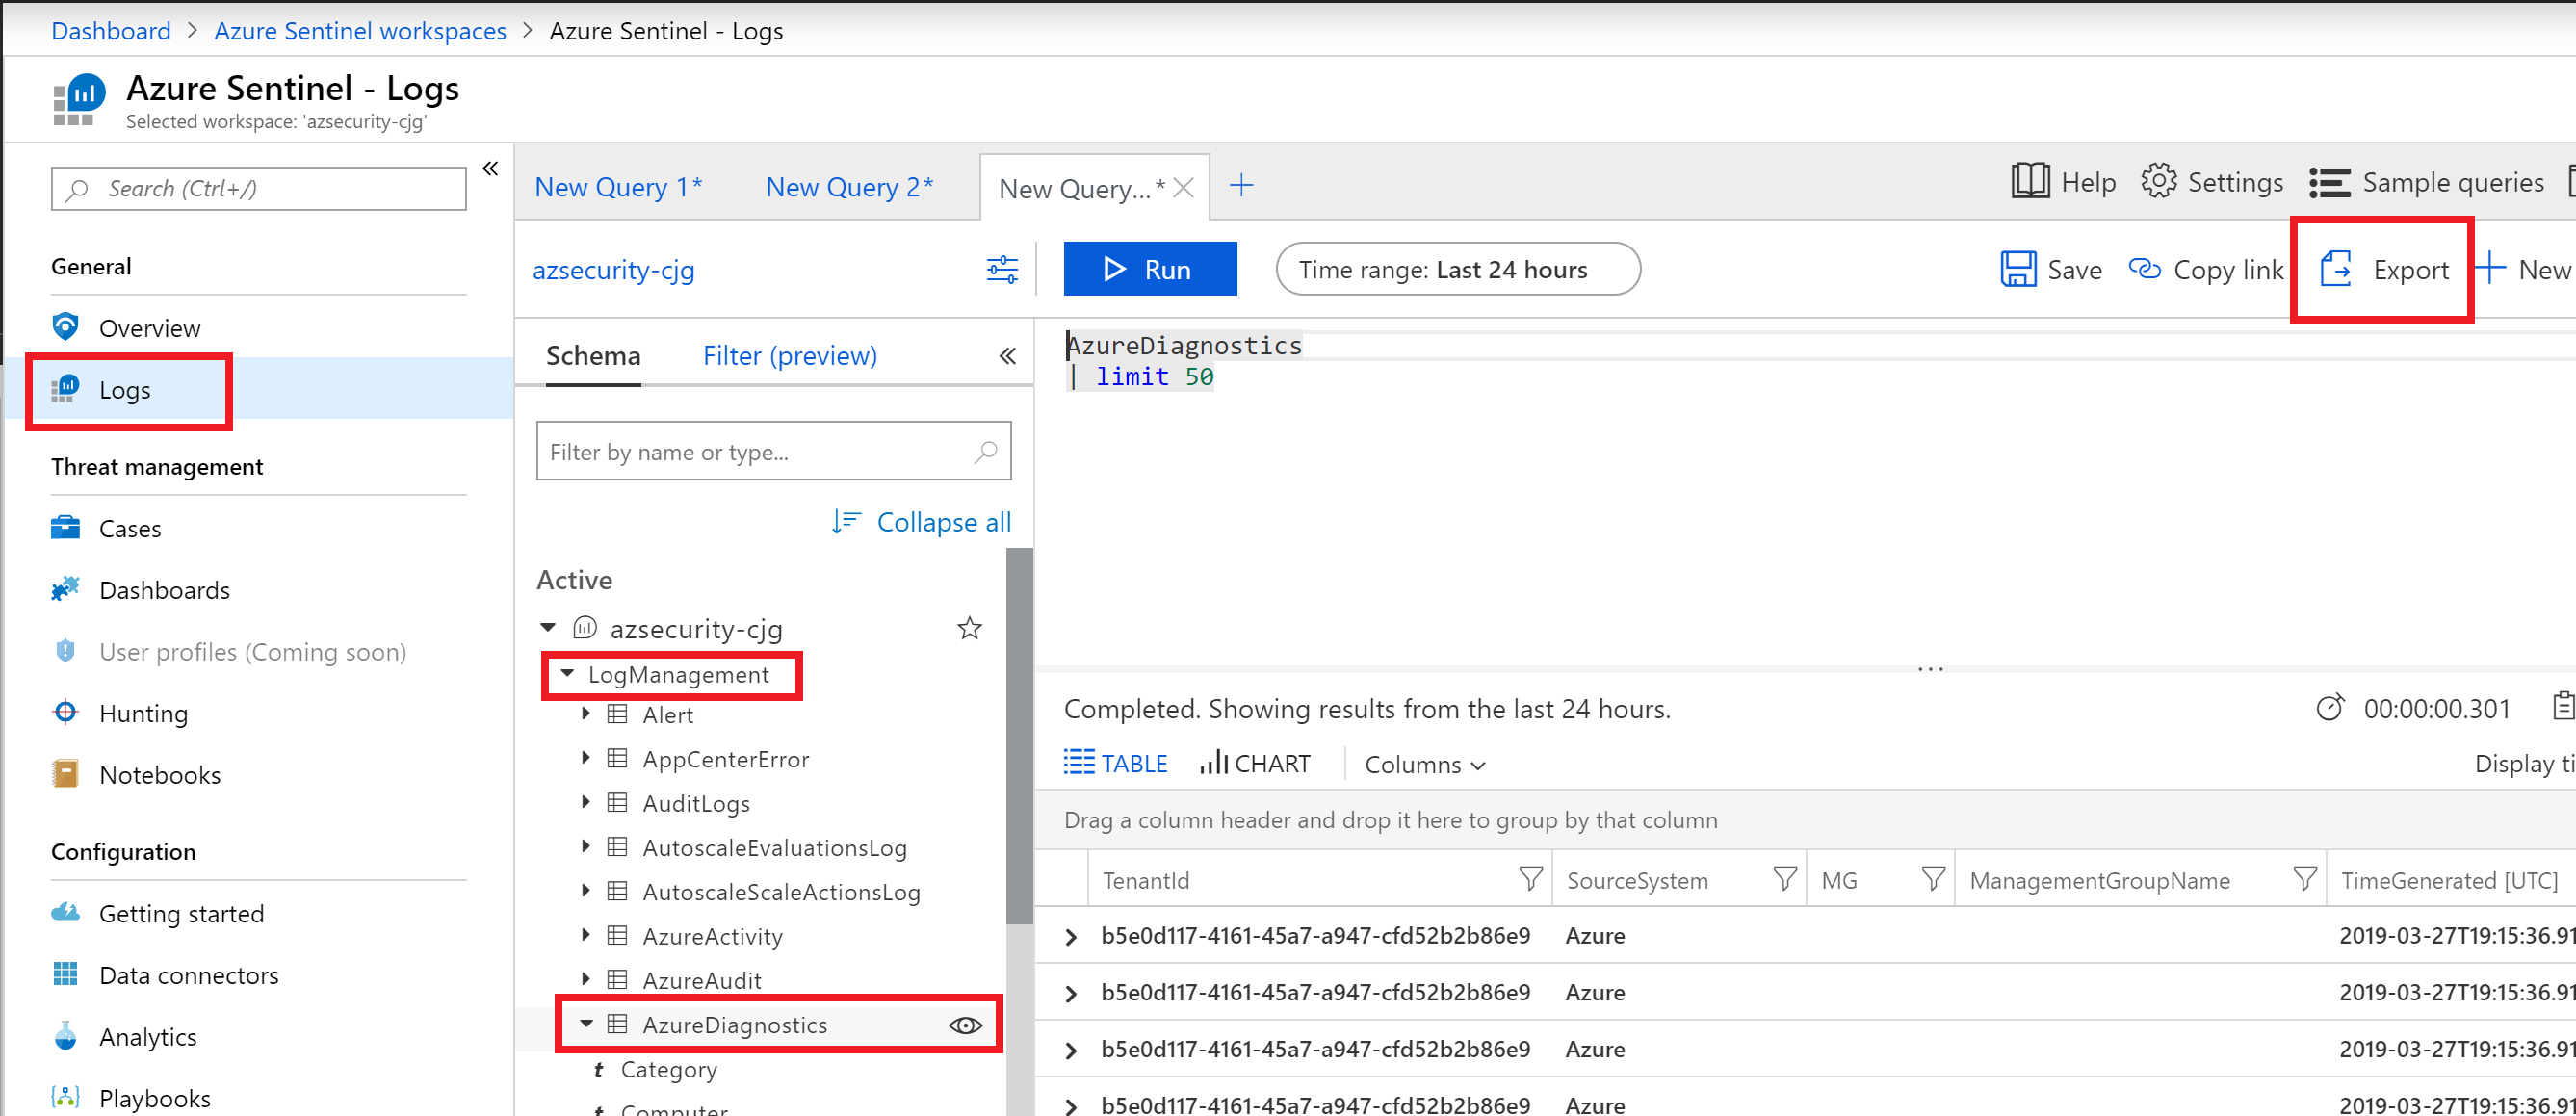 The Azure Sentinel Logs screen is displayed. The logs item is selected in the left menu. LogManagement and AzureDiagnostics are selected from the active schema list. The Azure Diagnostics item has an eye icon. A new query tab is shown with the Export item highlighted.